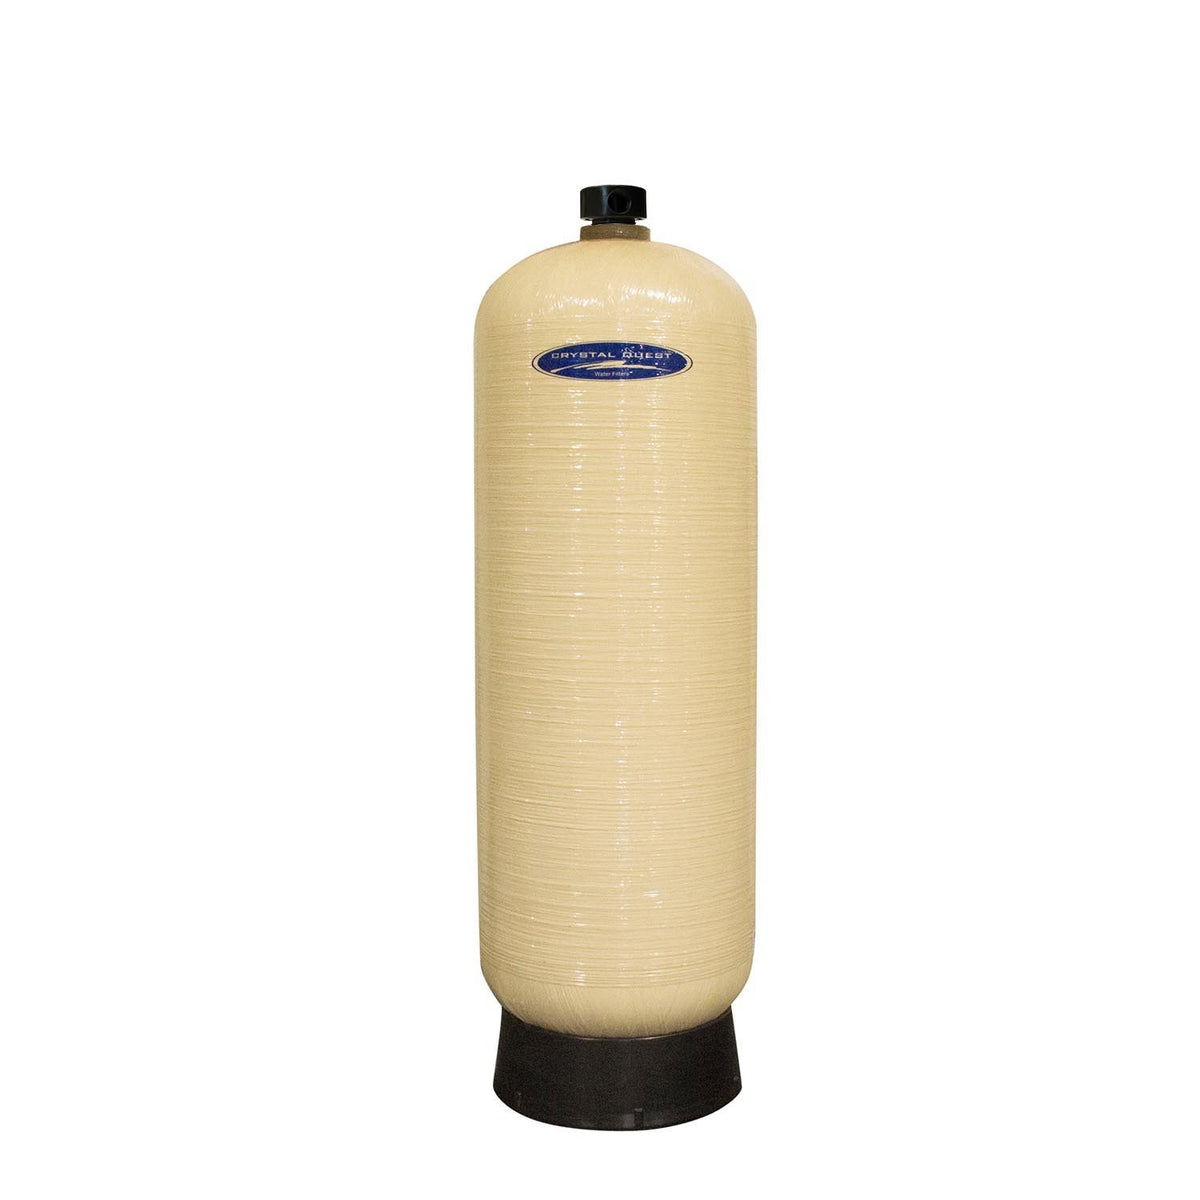 70 GPM Commercial Salt-Free Water Softener (Anti-Scale) System | 28 liters - Commercial - Crystal Quest Water Filters